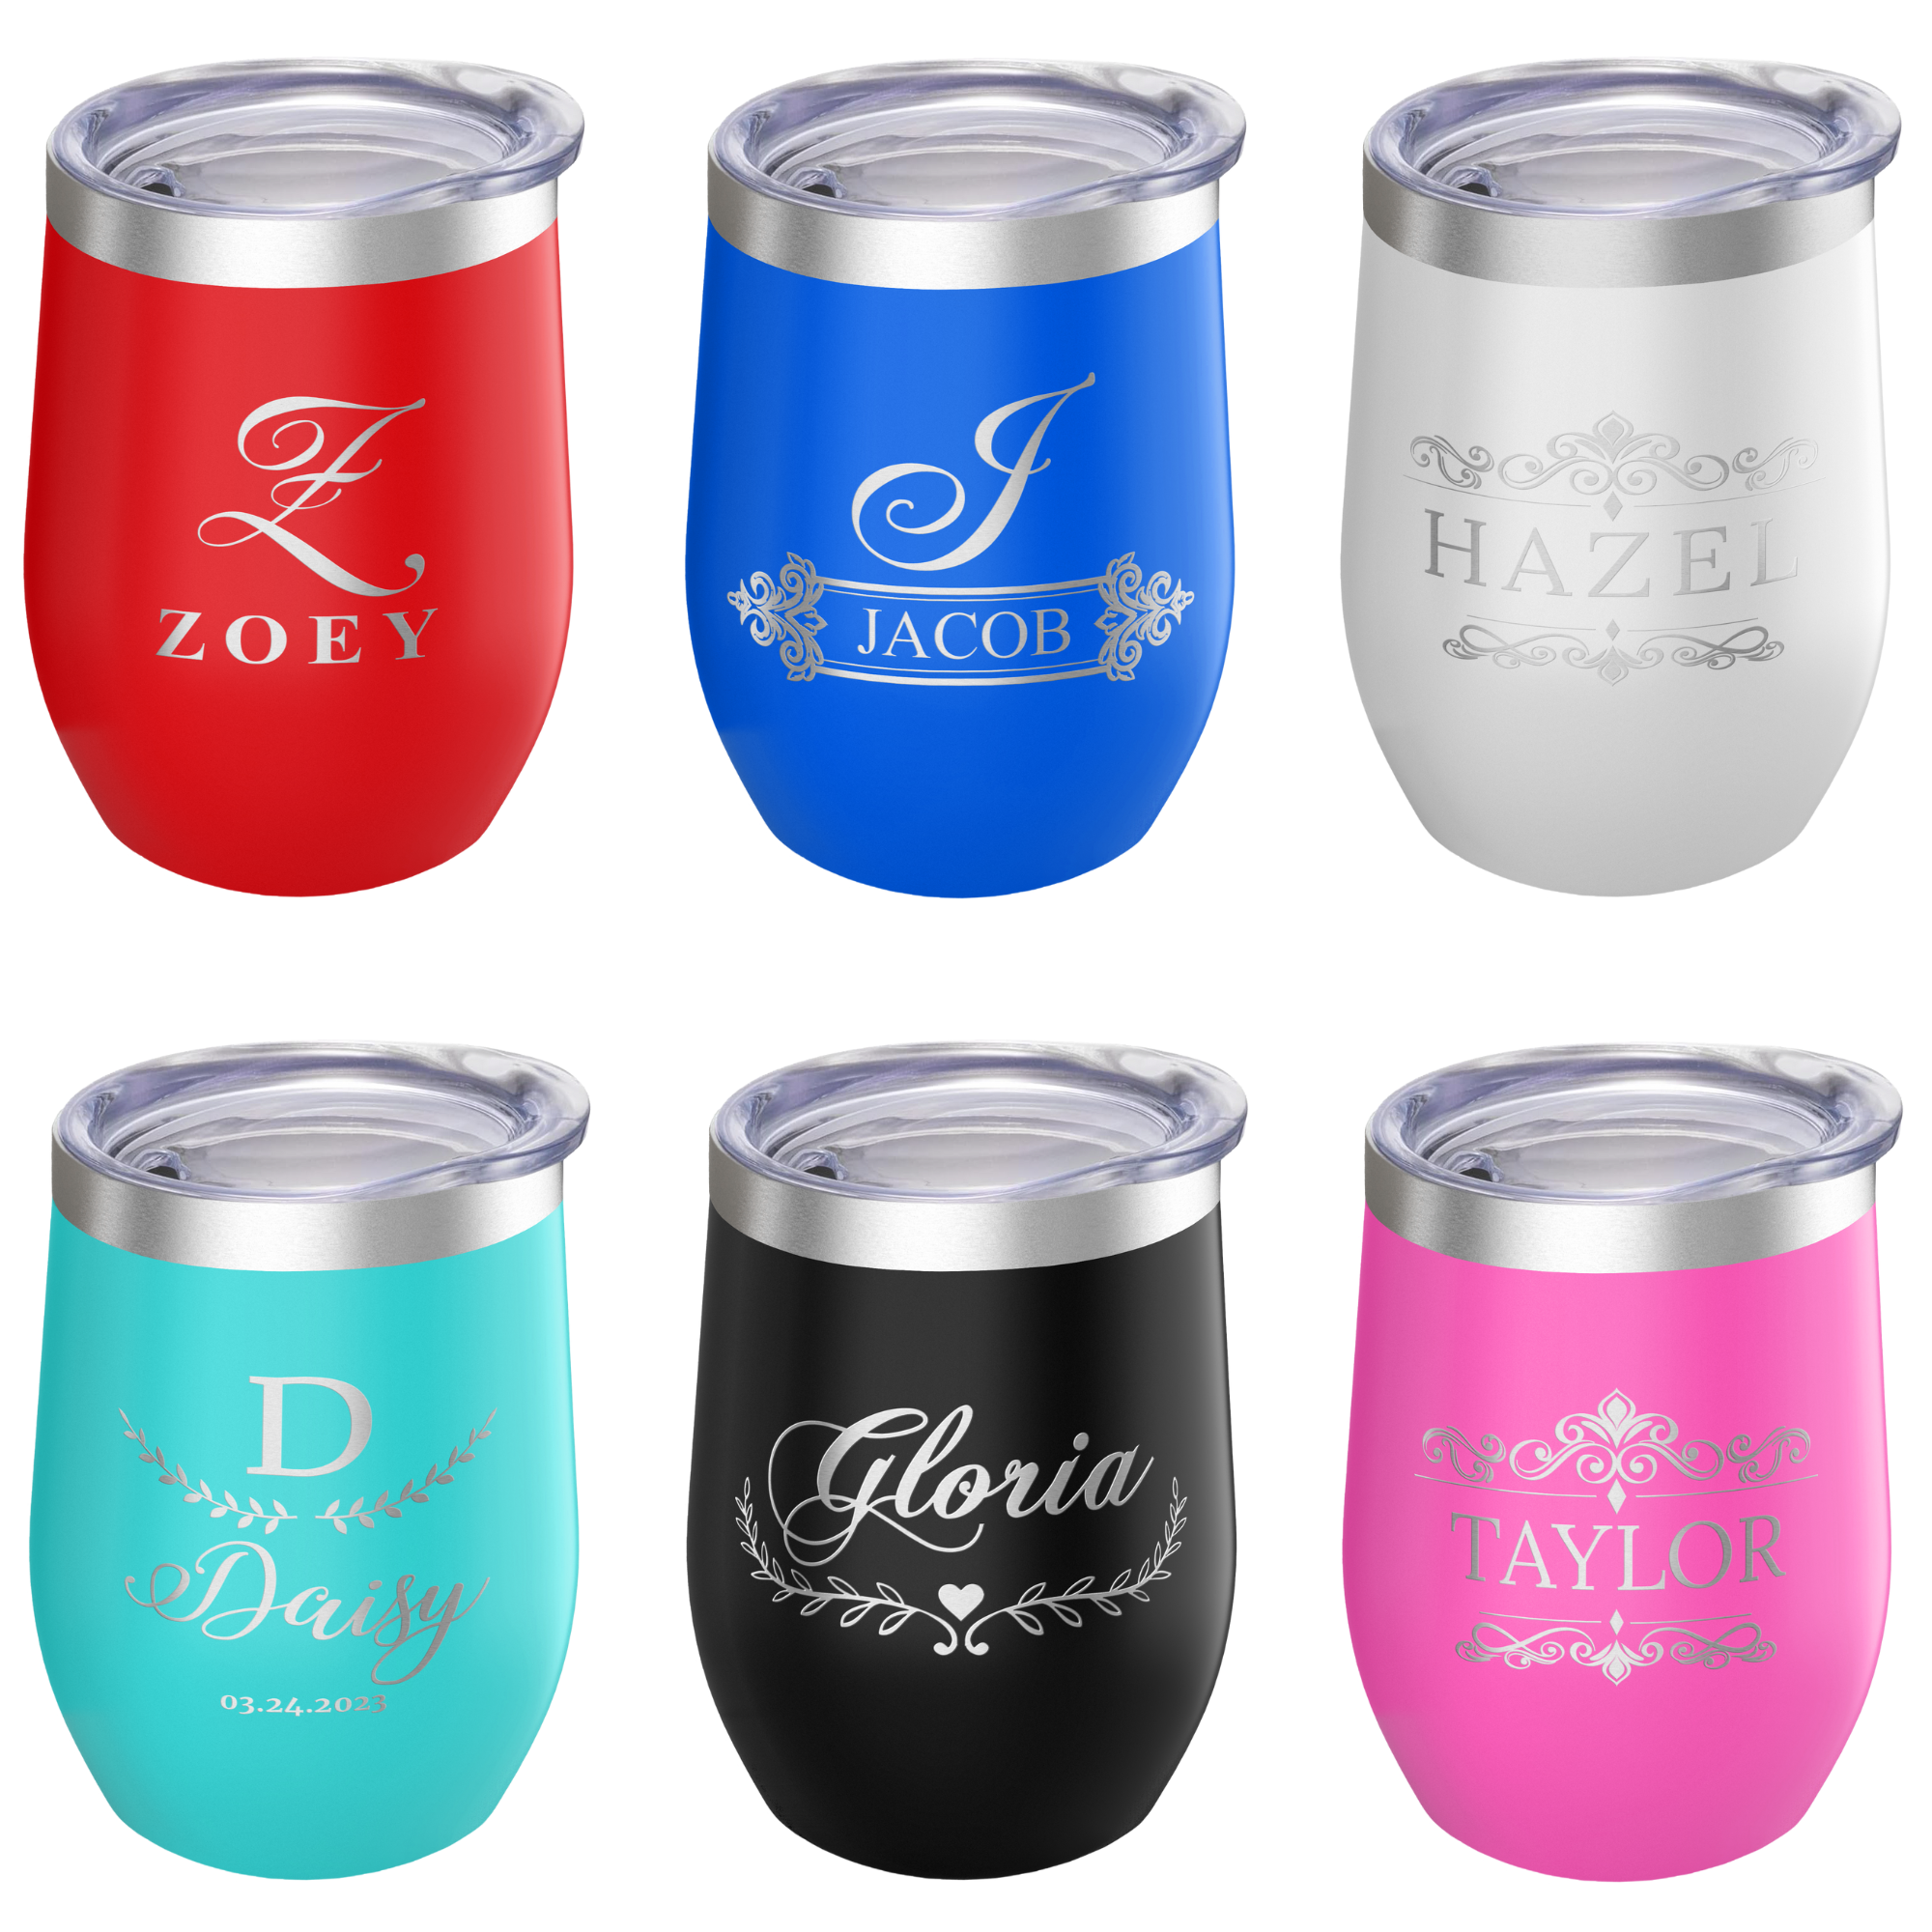 https://giftsinscribed.com/wp-content/uploads/Custom-wine-tumblers-variety-of-colors-engraved.png